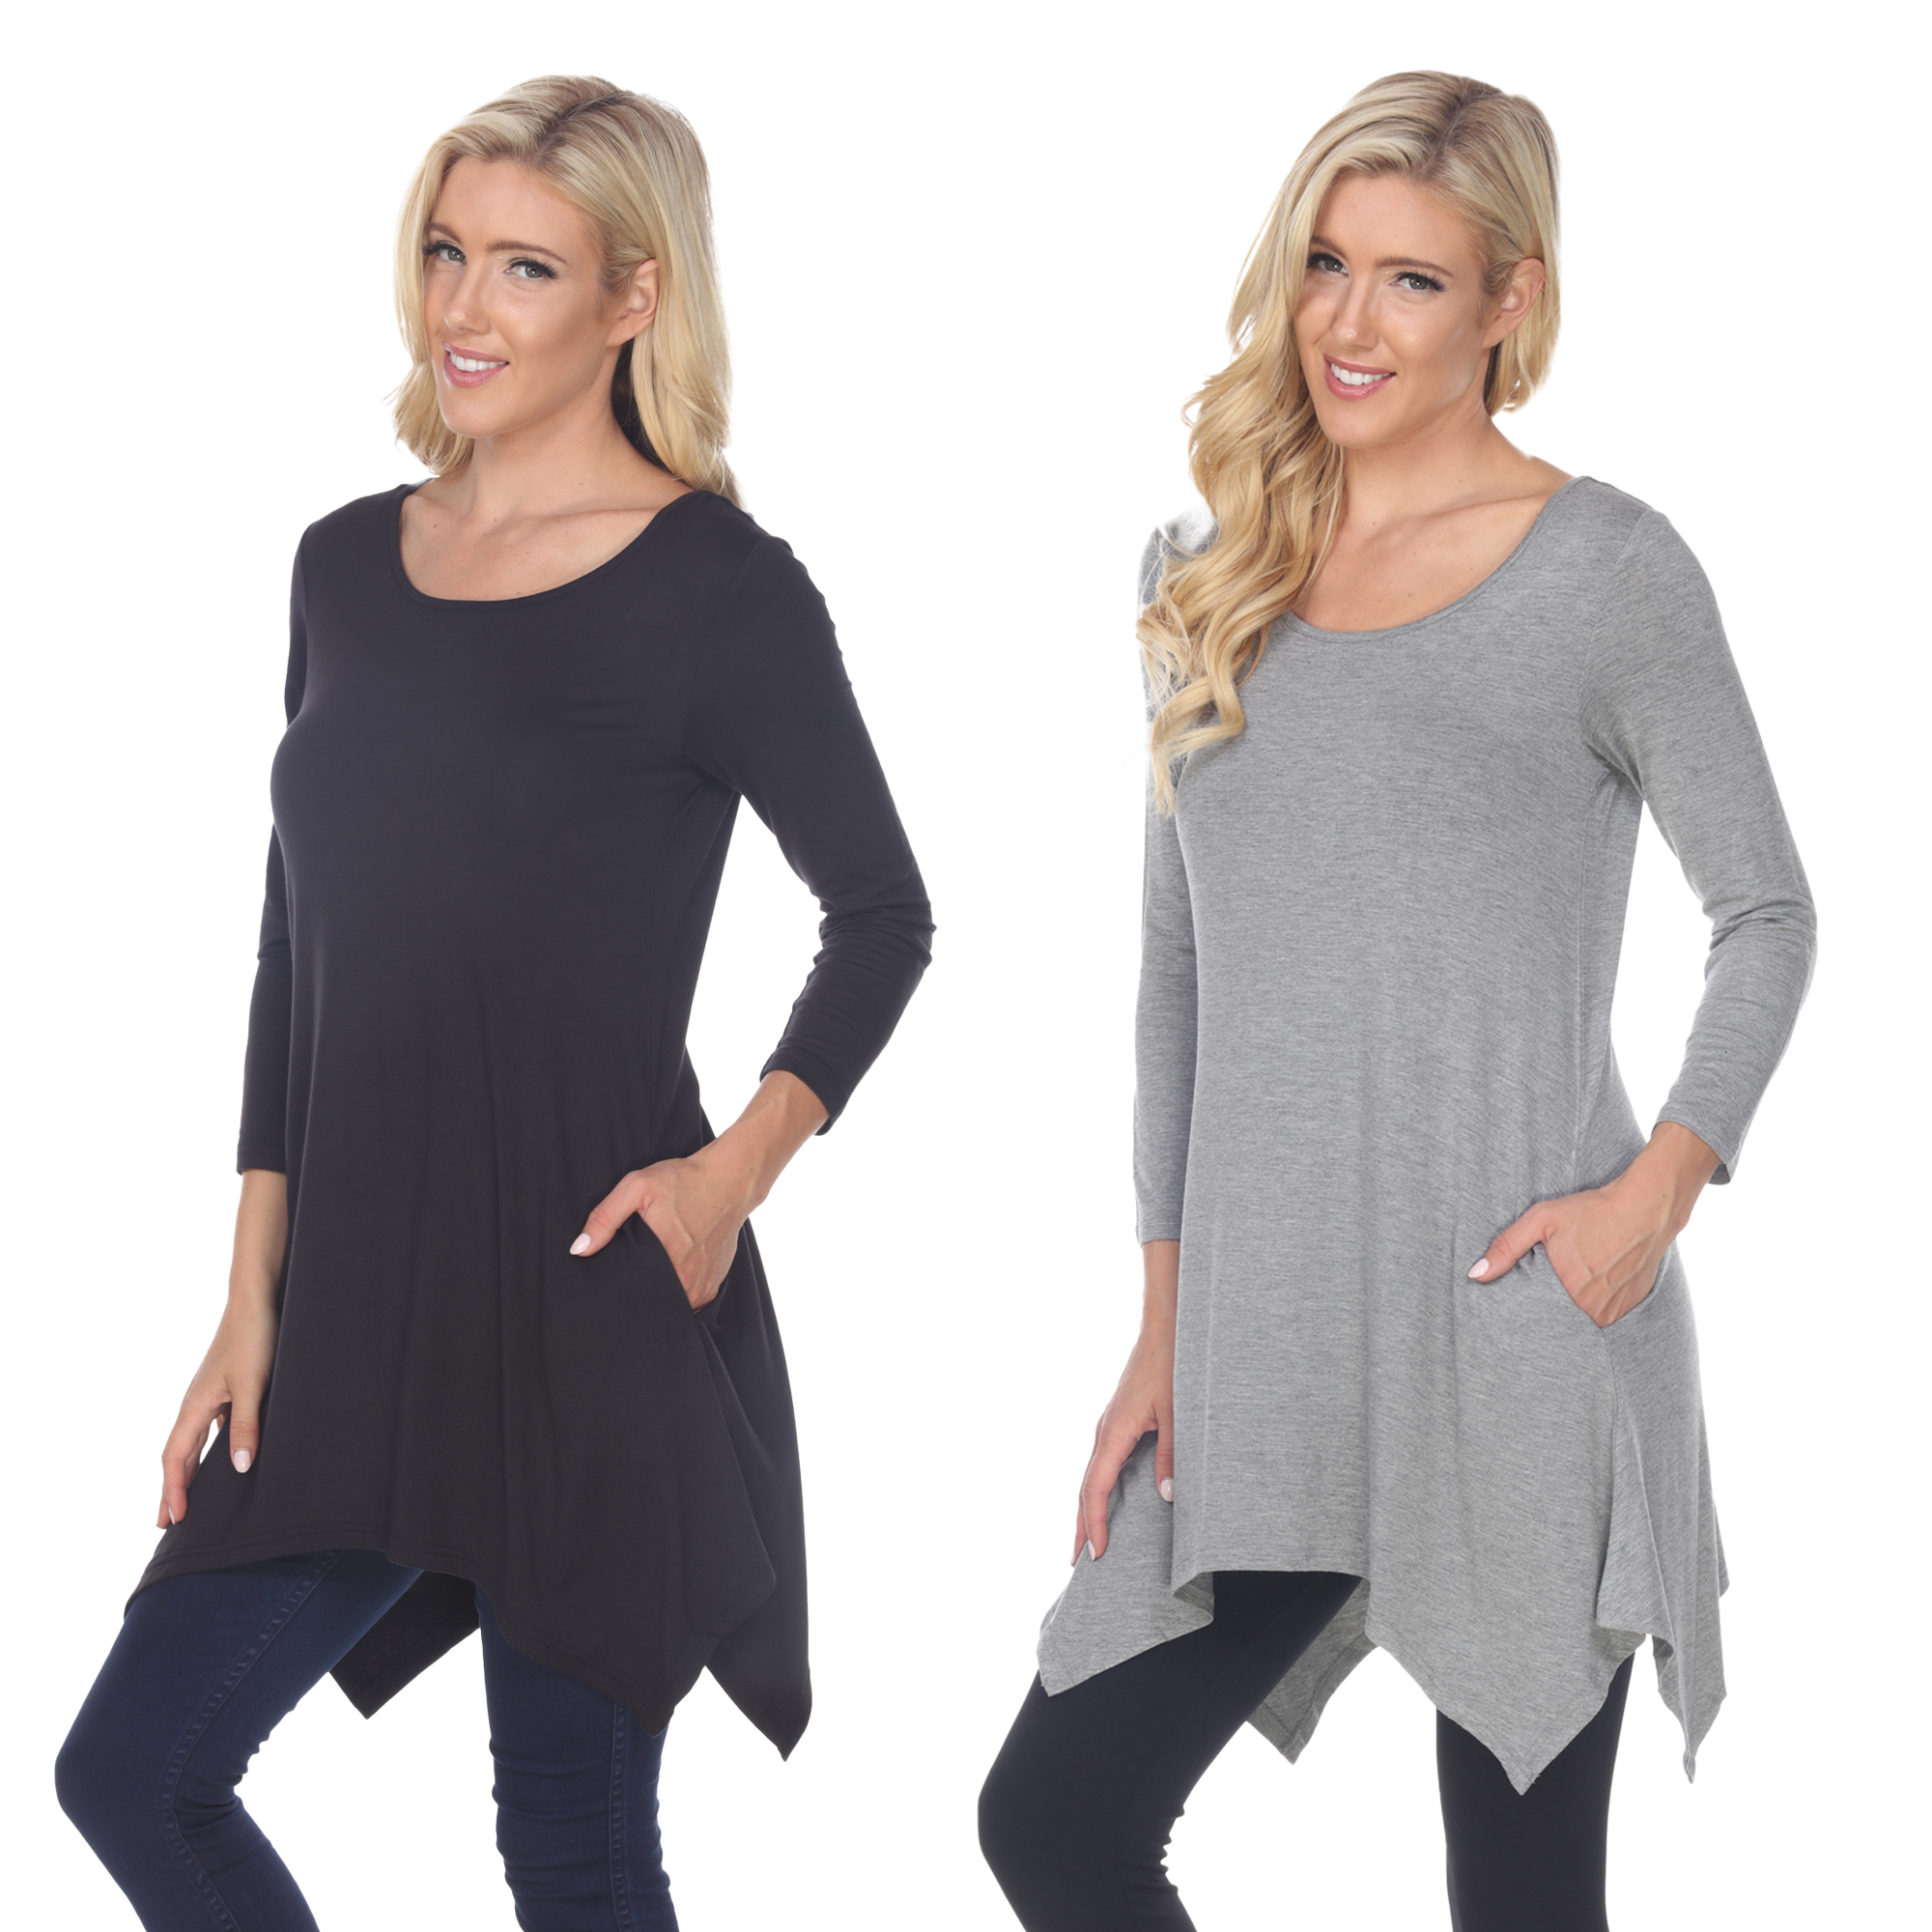 White Mark Women's Pack Of 2 Black Tunic Top - Black, Charcoal, Small